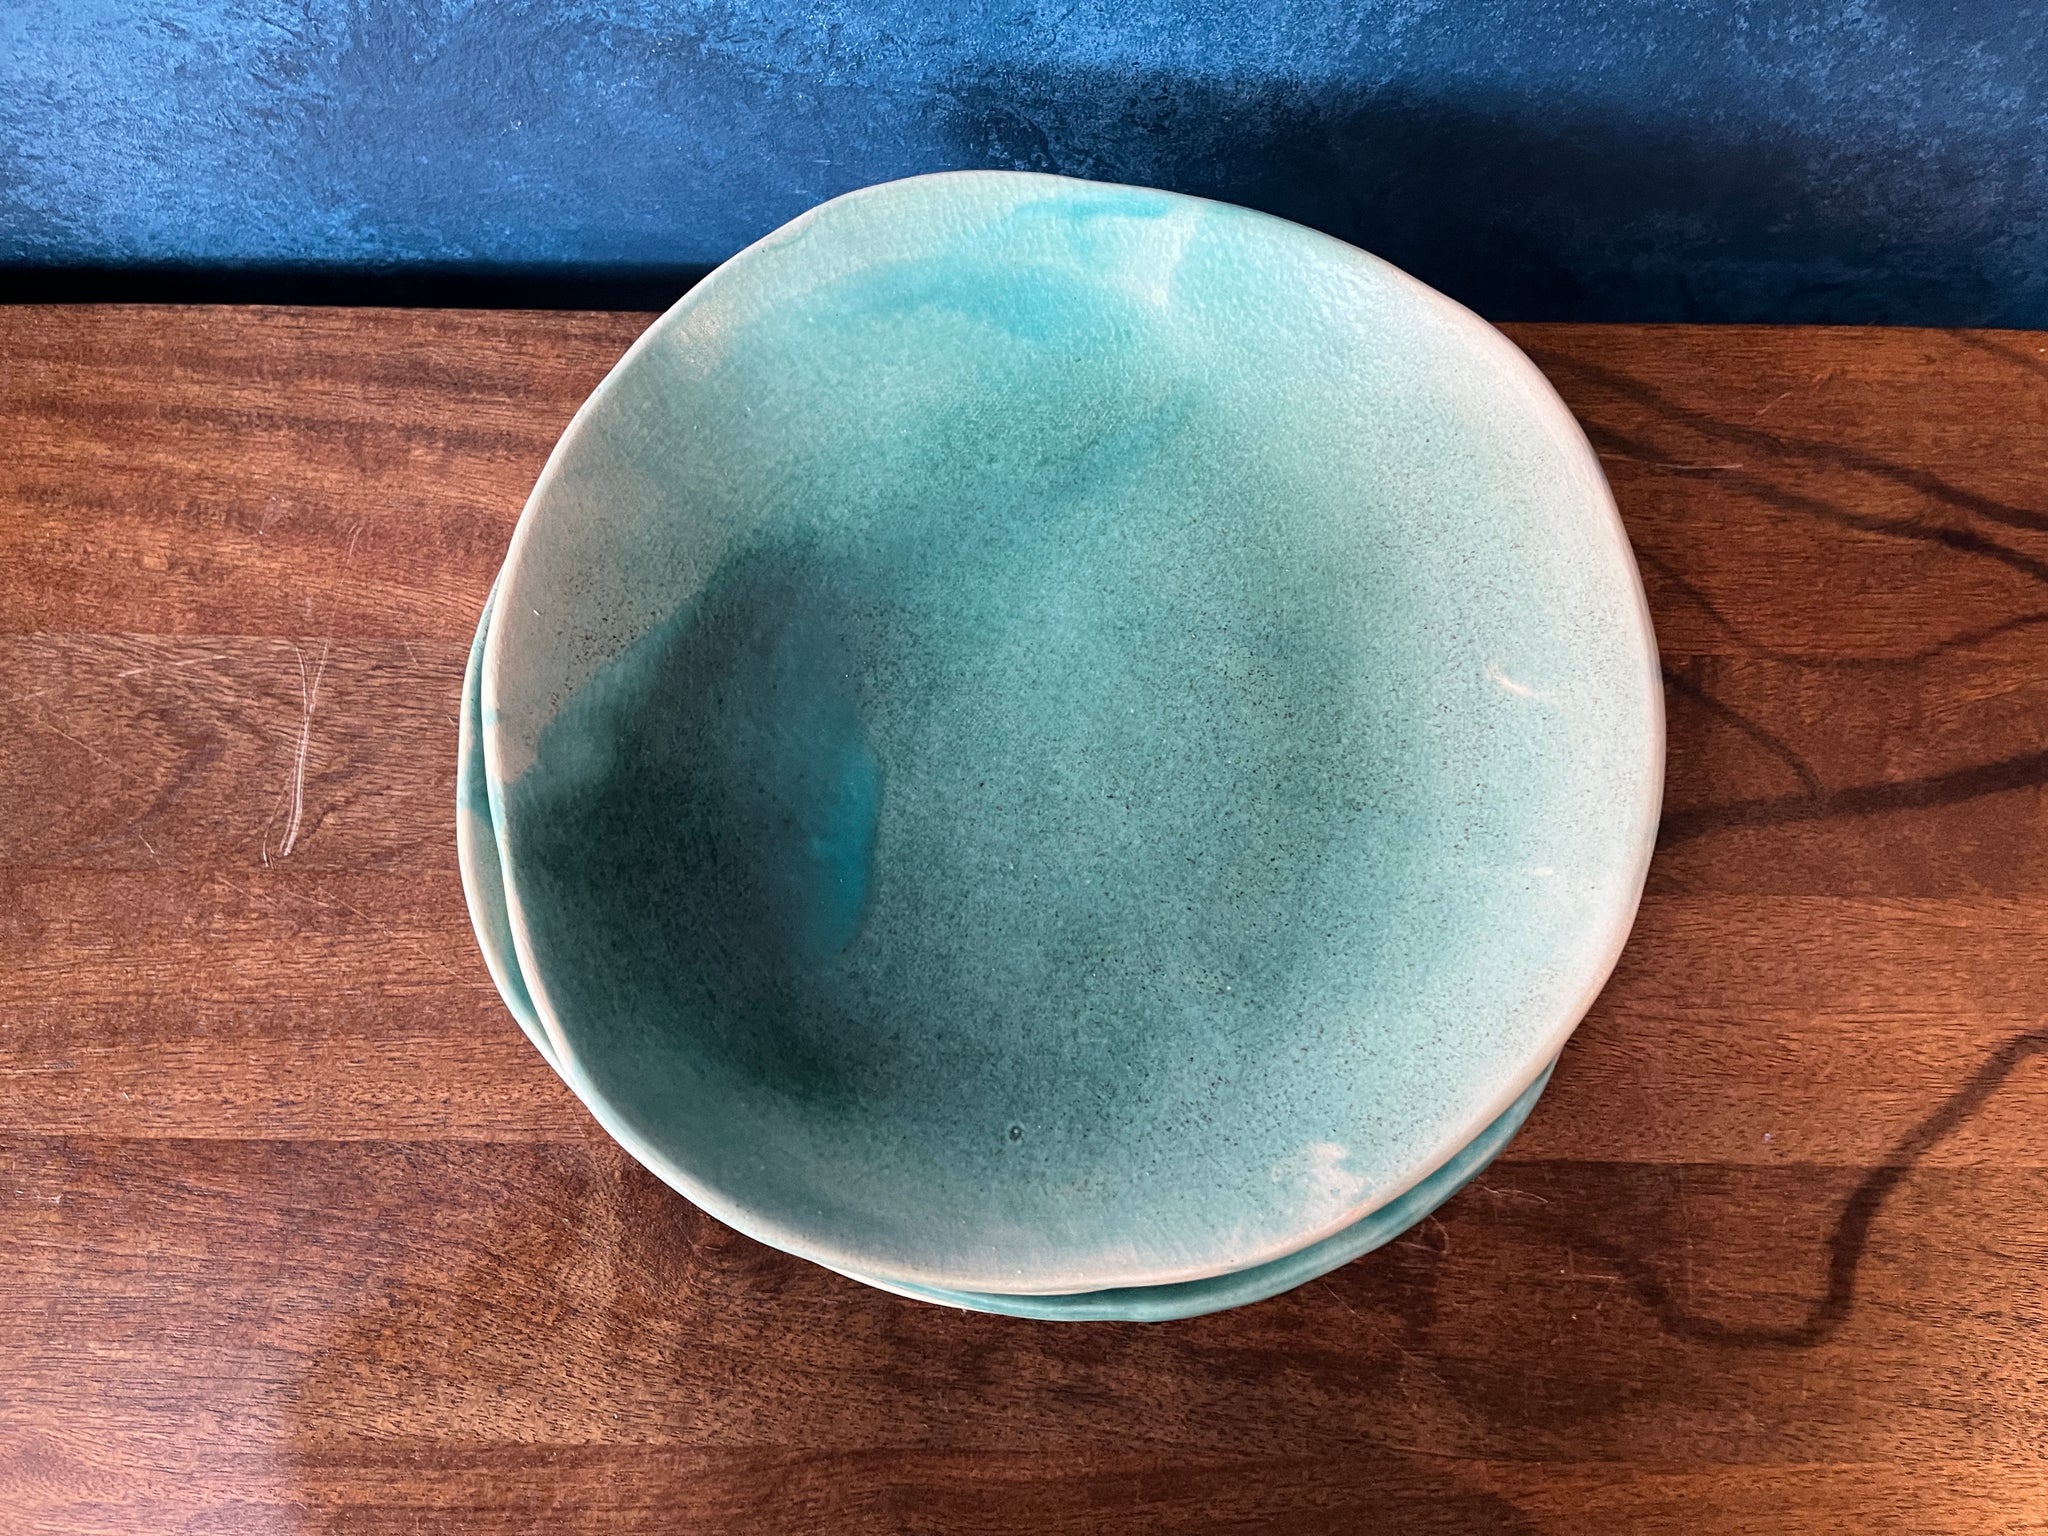 Hand Made Natural Freeform - Turquoise Sea Plate